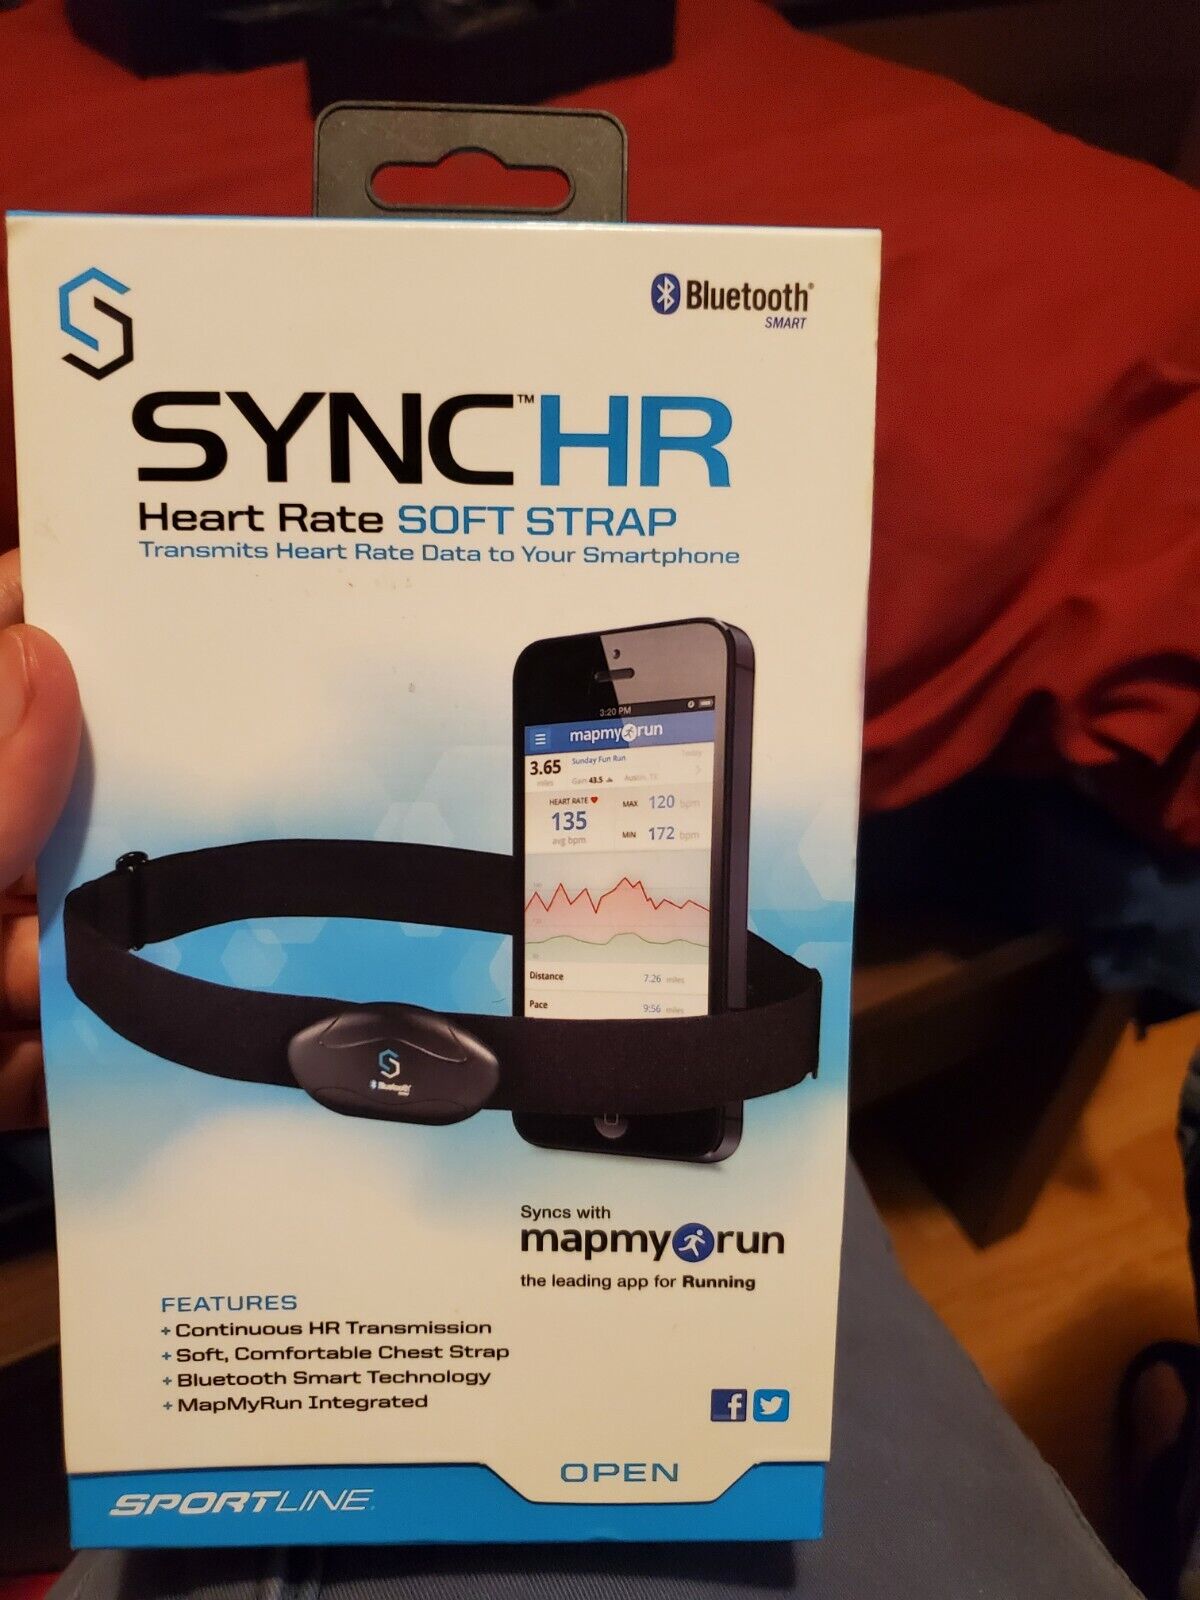 SYNC Save Japan Maker New money HR Heart Rate Soft Strap Send Blue Hear smart over to phone